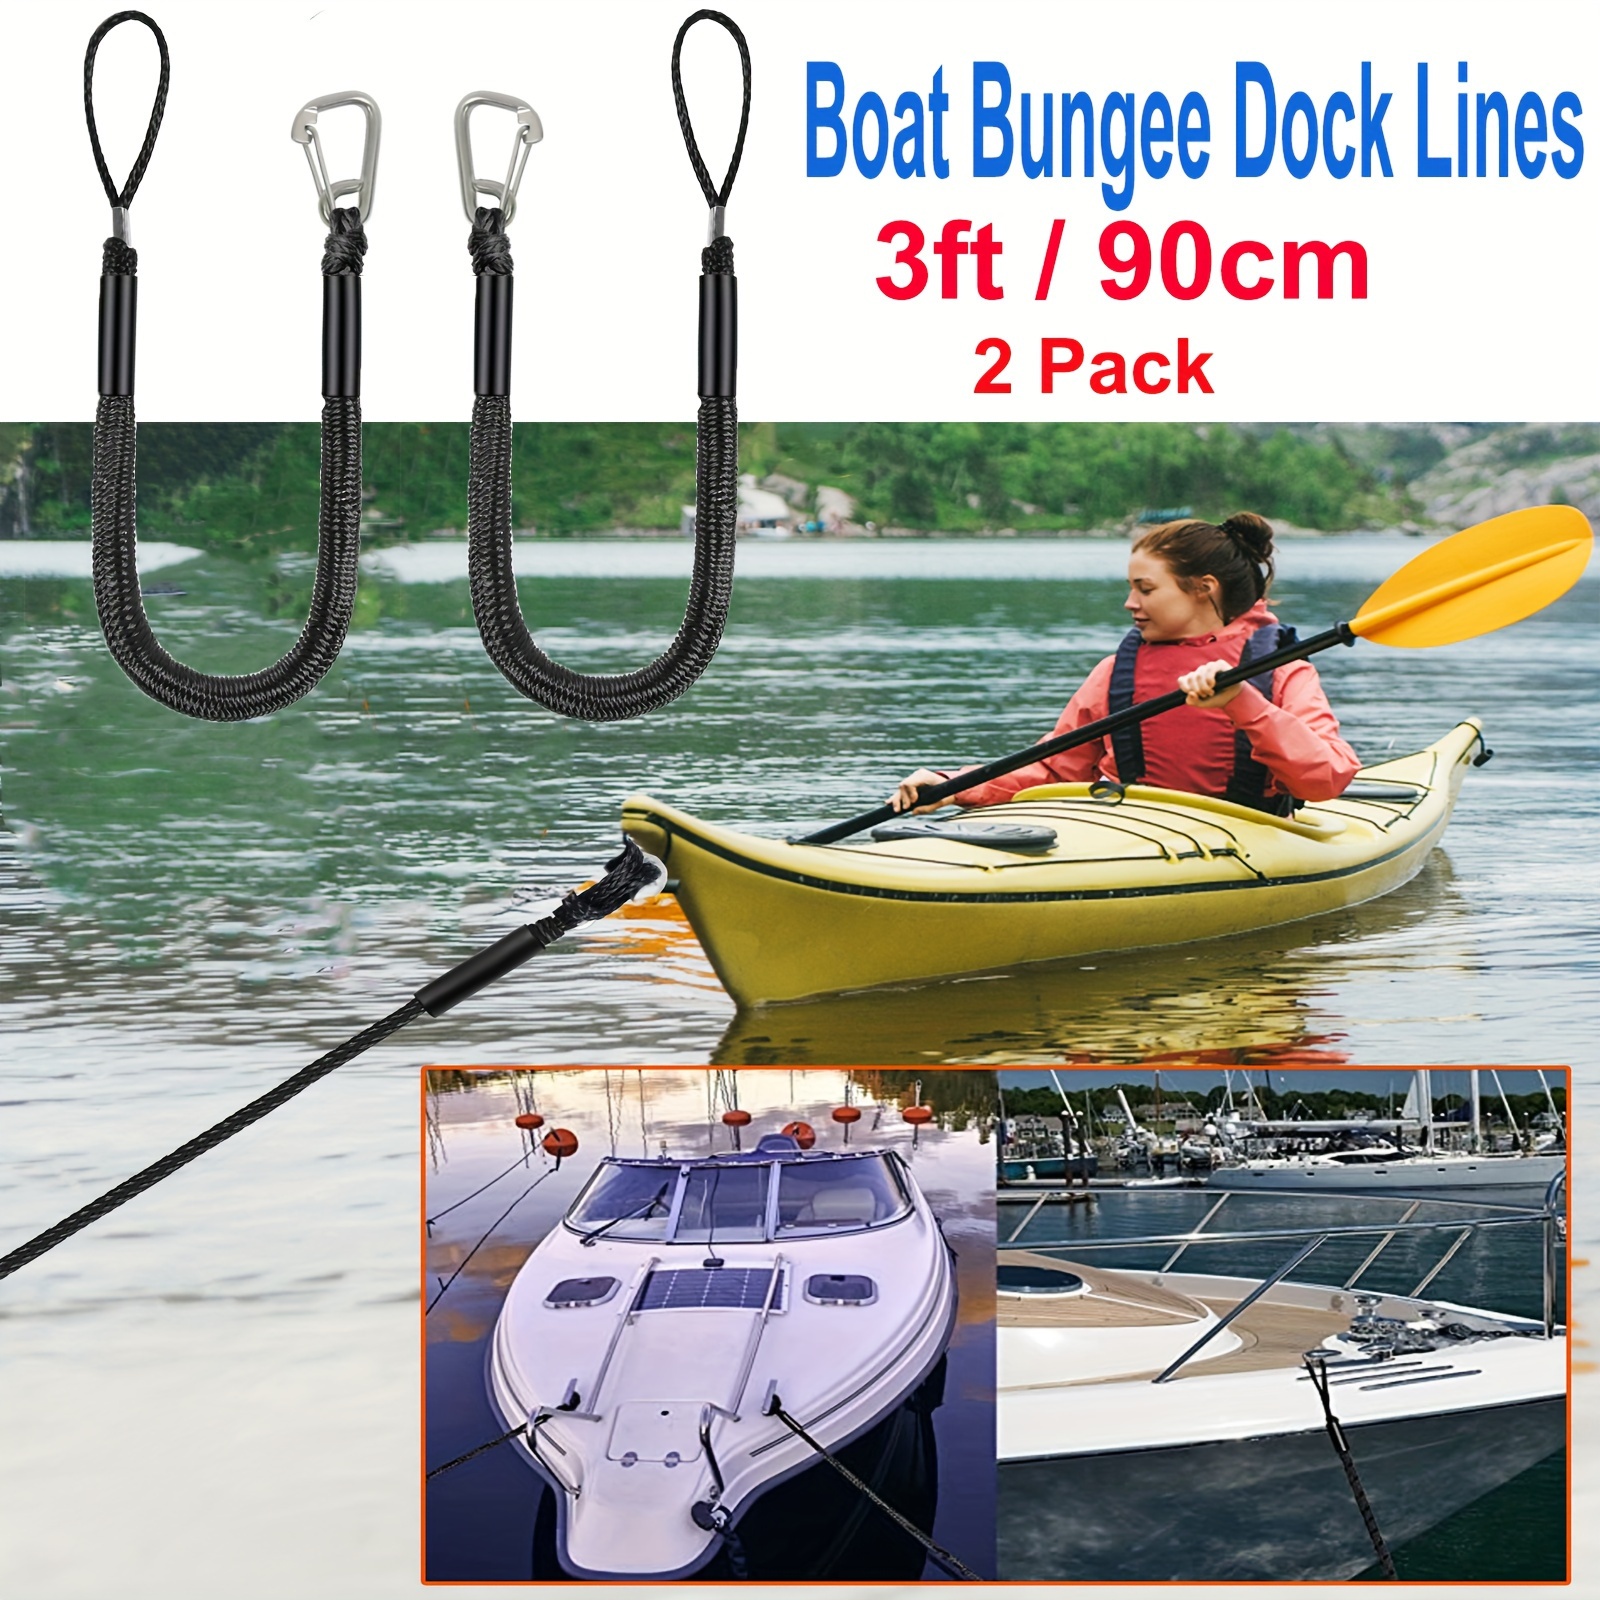 2 Pack Boat Bungee Dock Lines With Stainless Clip Kayak